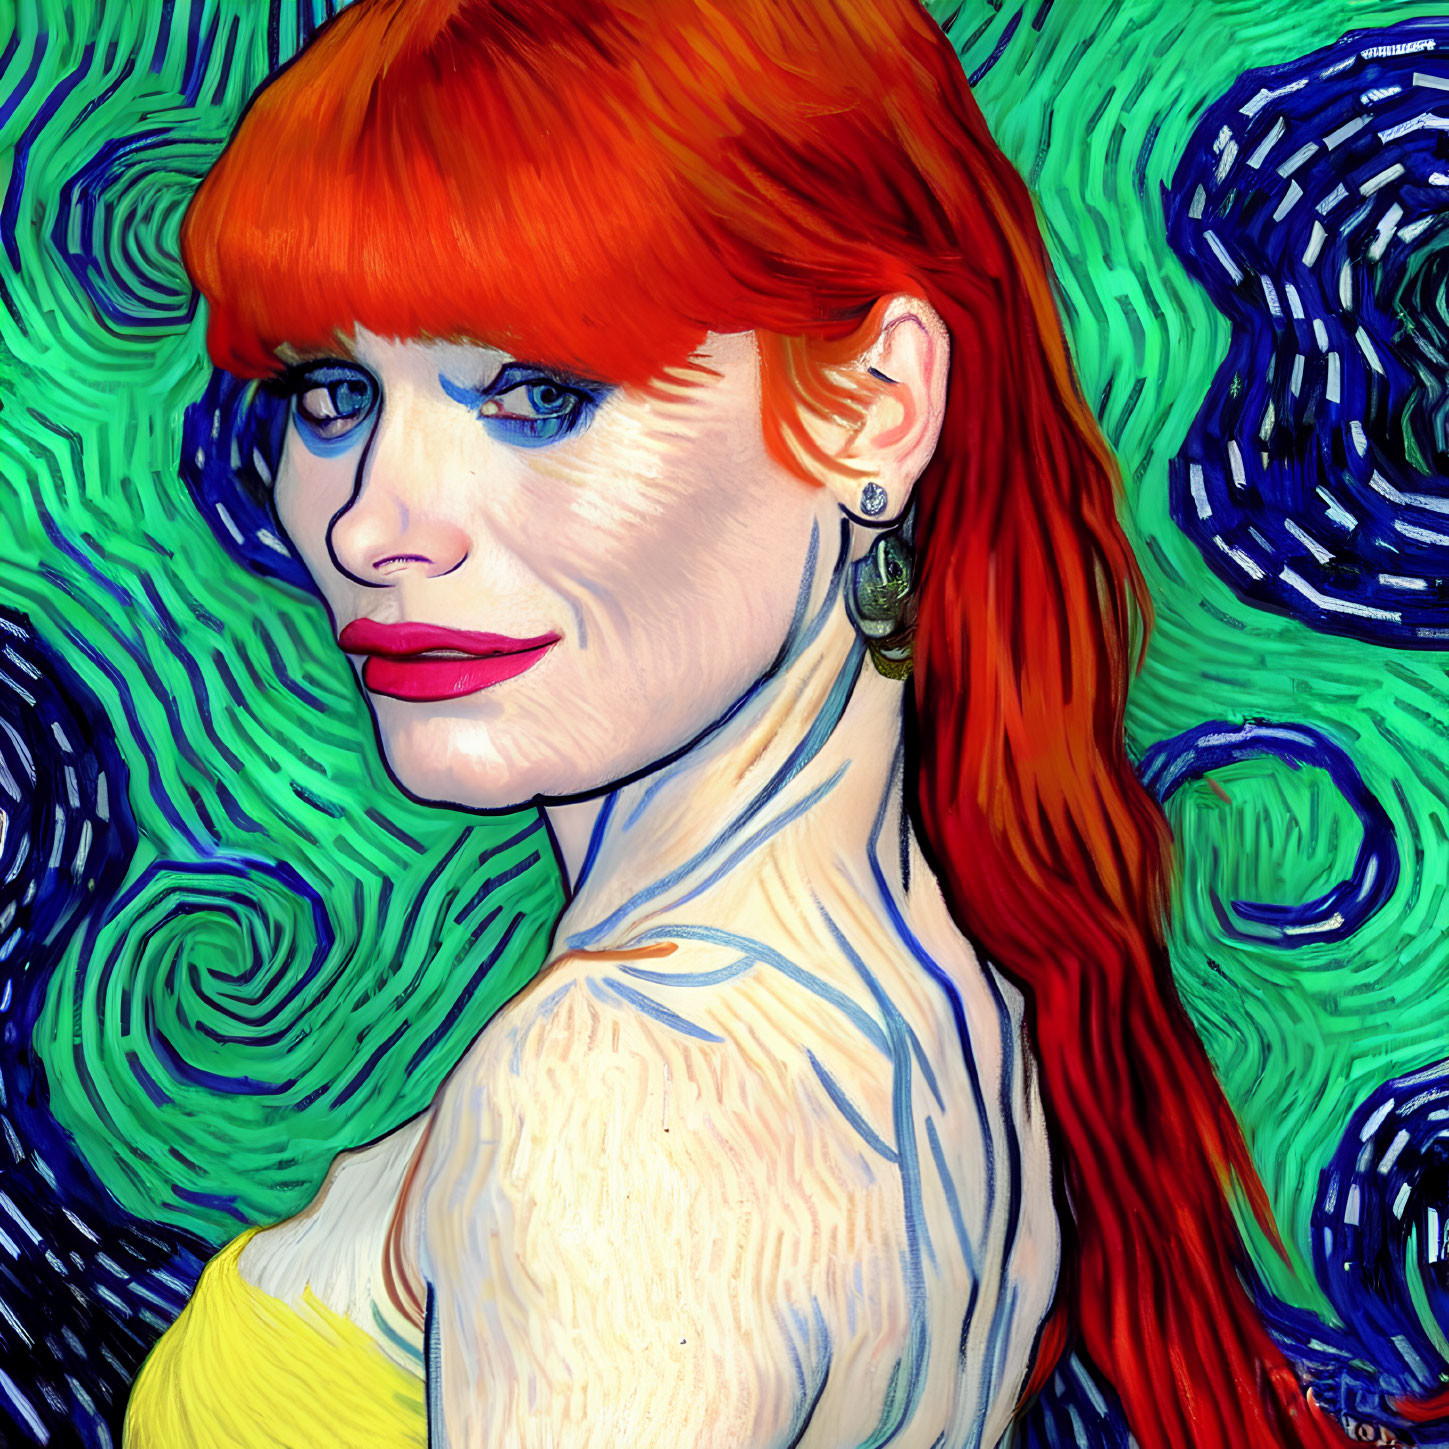 Red-haired woman with blue eyes and red lipstick on swirling blue background.